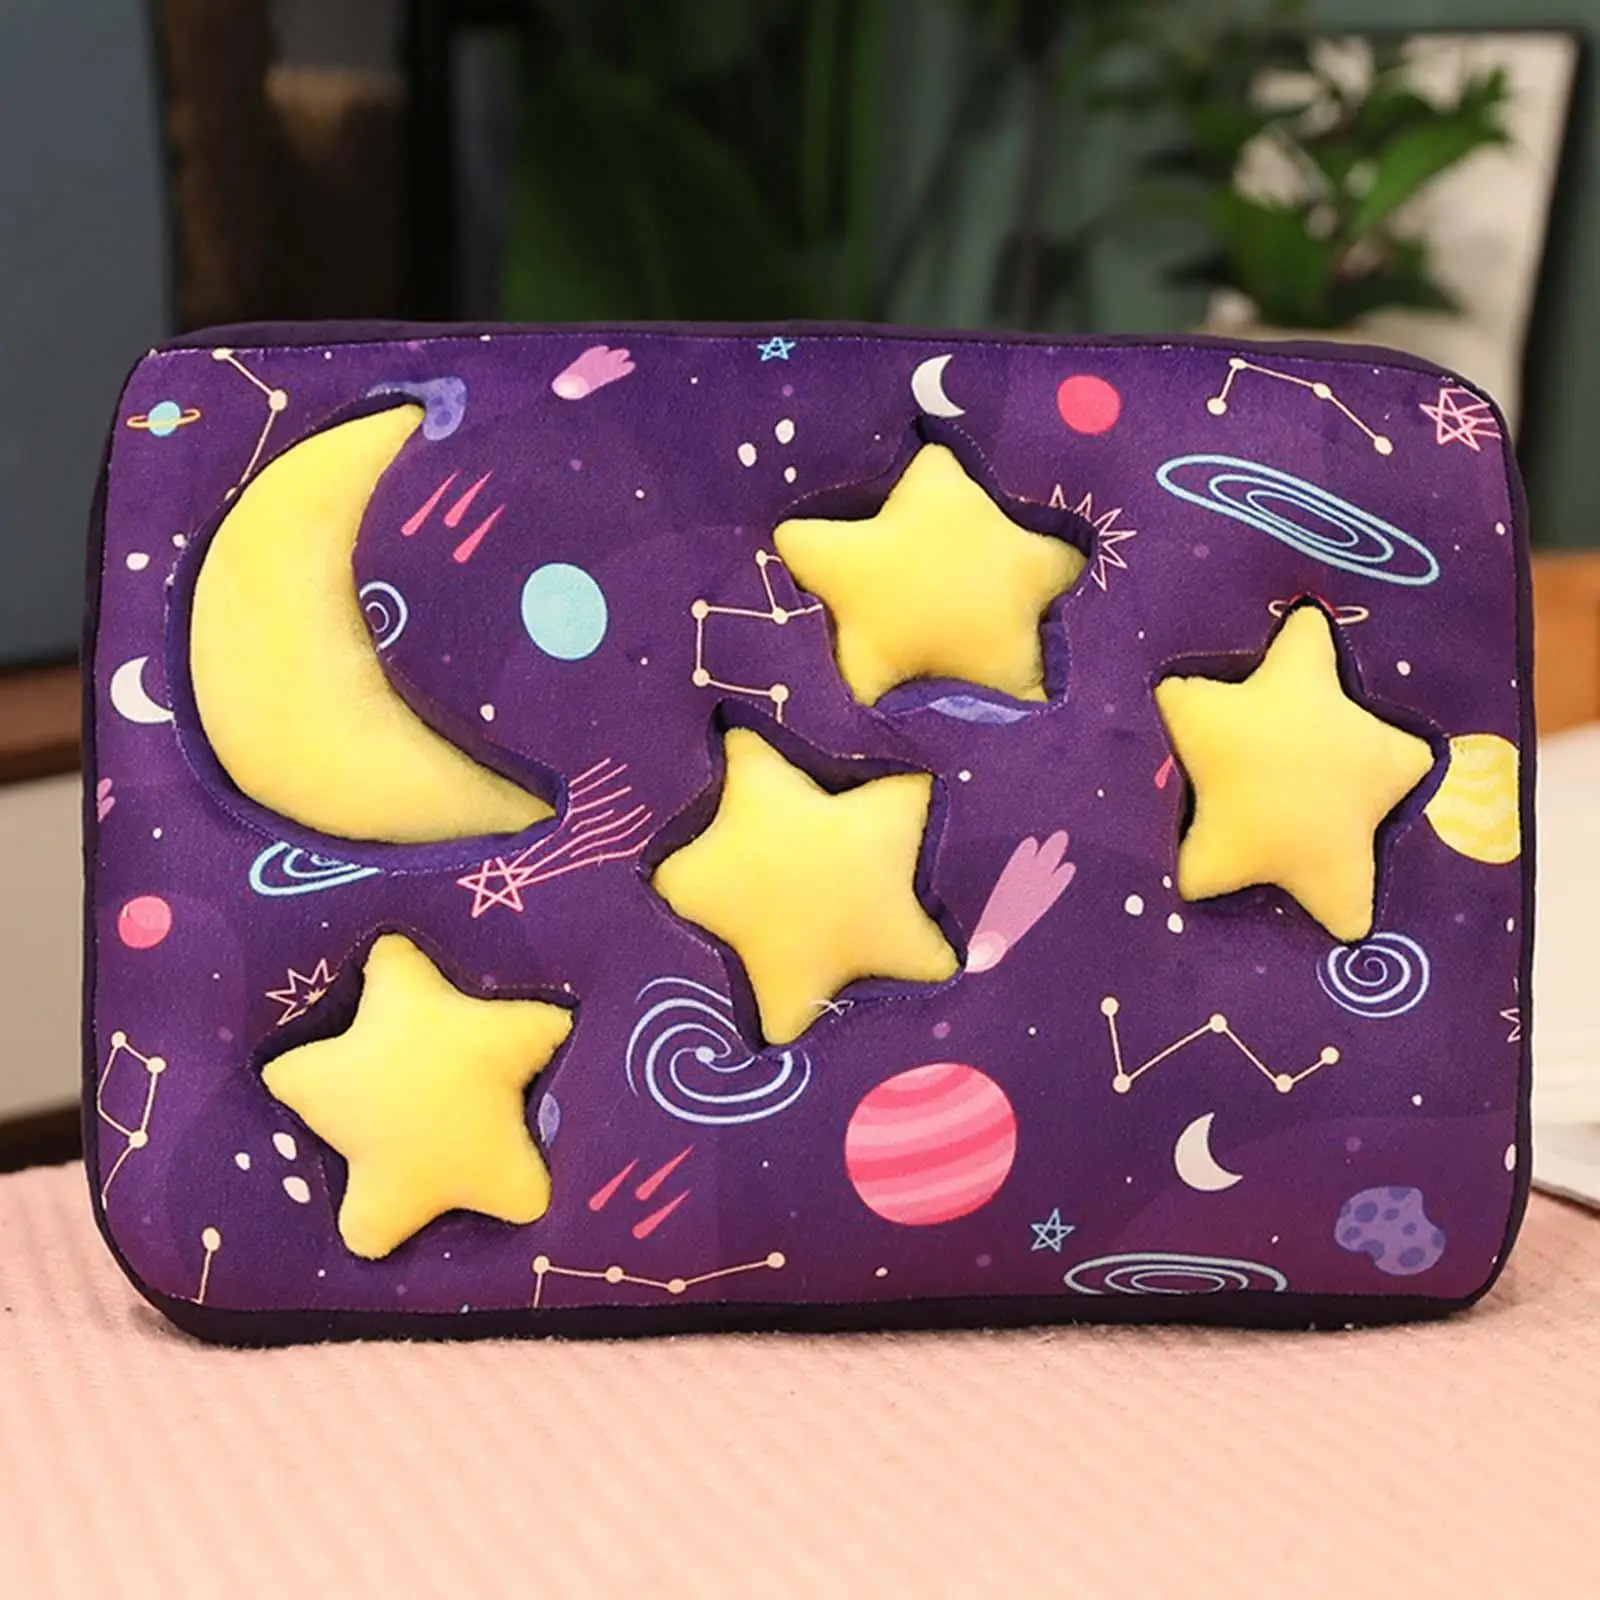 Cartoon Star Moon Outer Space Sky Decor Child Safety  Super Soft Throw    for Bedroom Toddlers Cats Dog